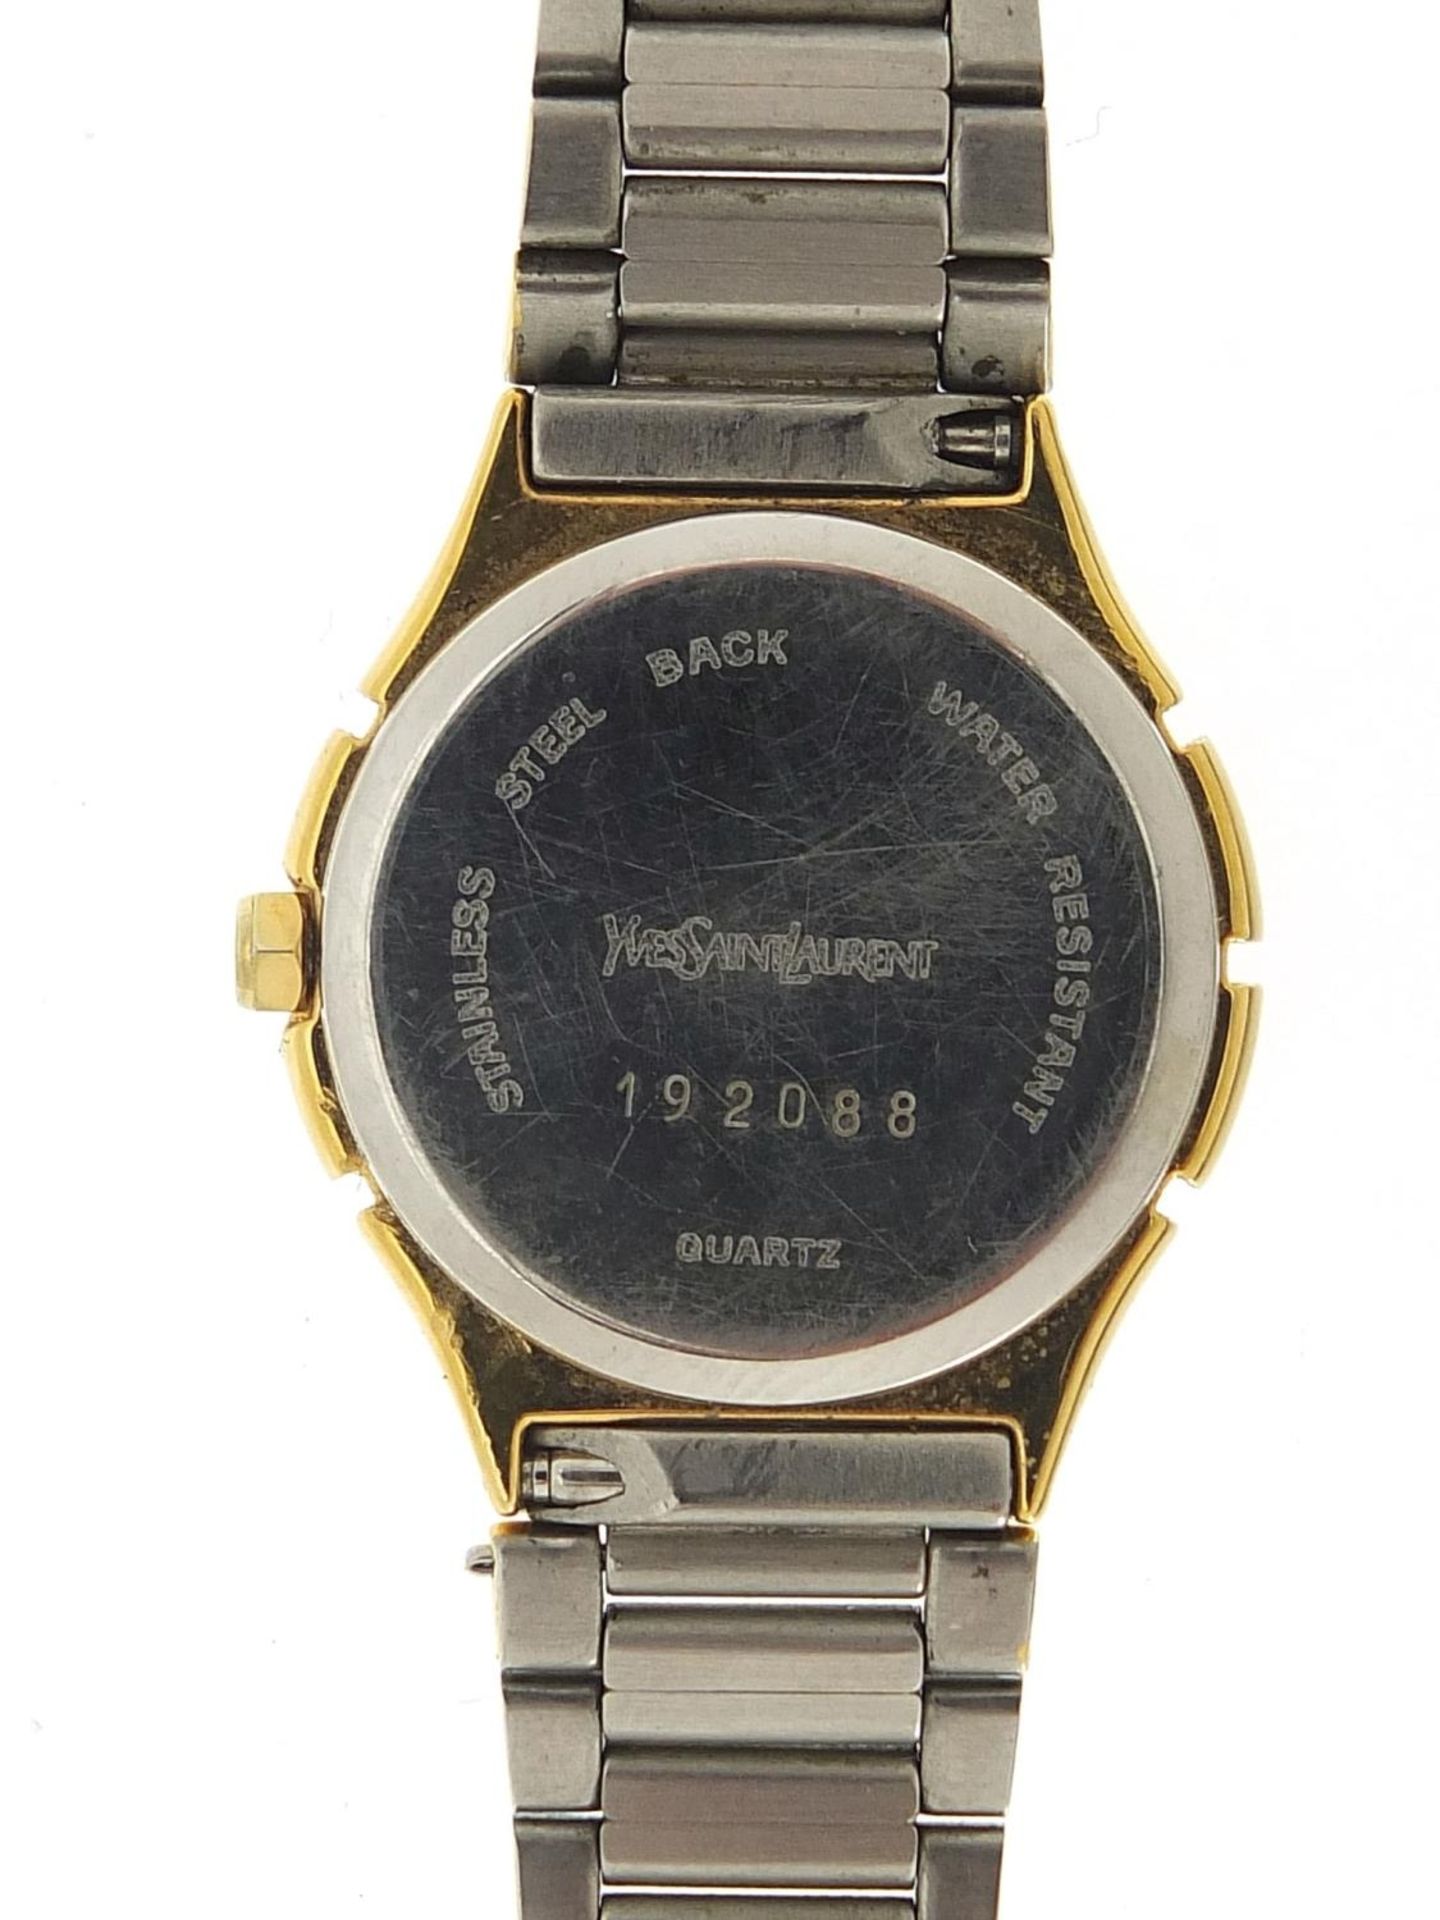 Yves St. Laurent, ladies quartz wristwatch numbered 192088, 24mm in diameter :For Further - Image 5 of 6